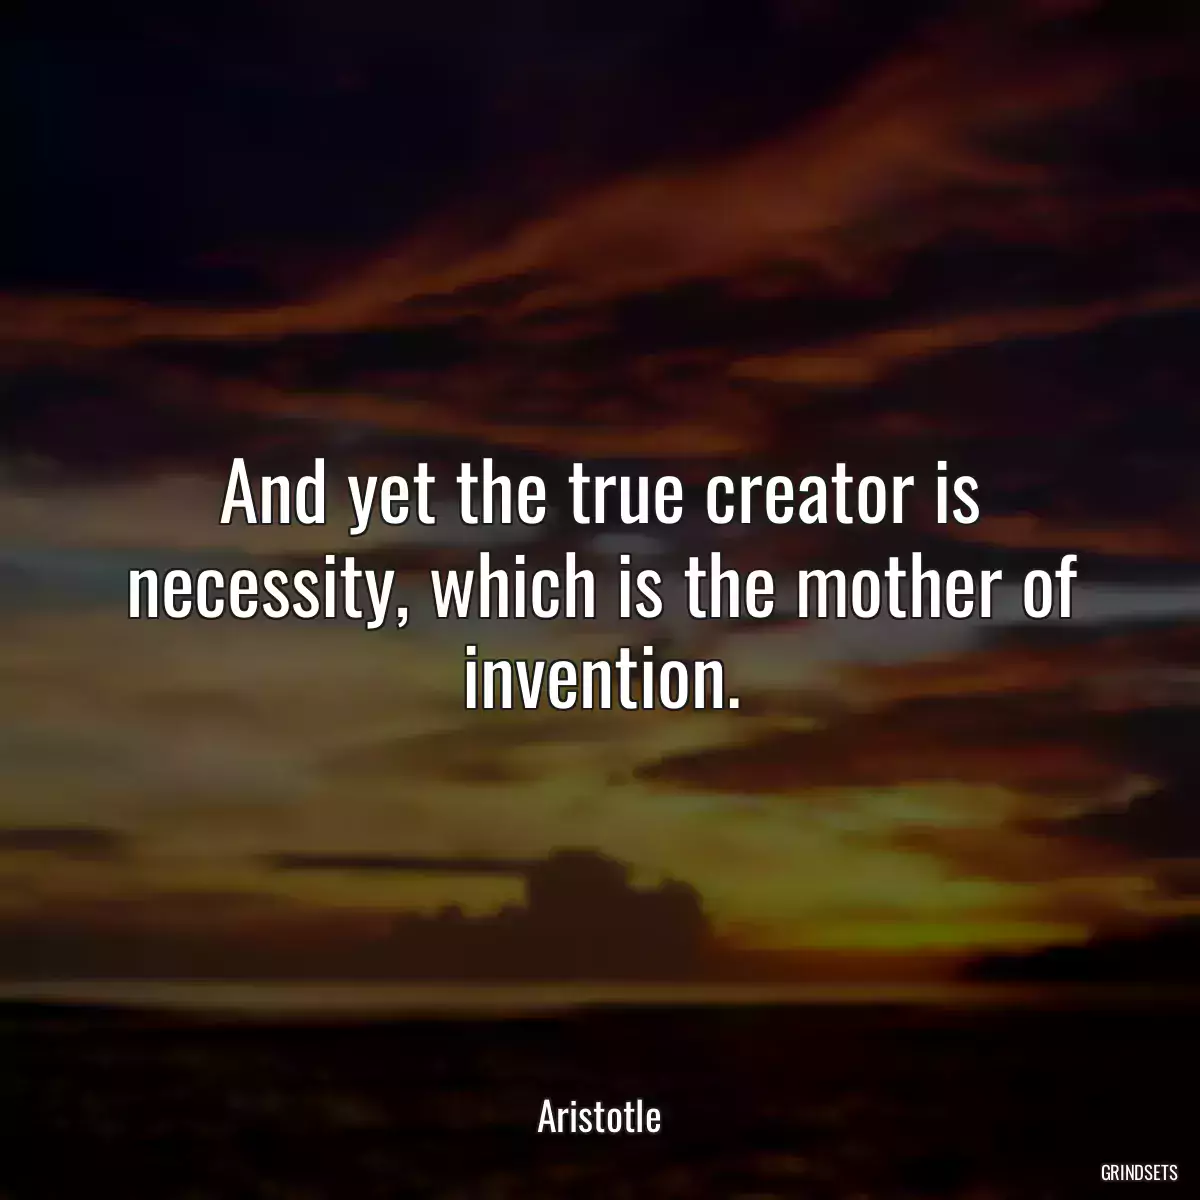 And yet the true creator is necessity, which is the mother of invention.